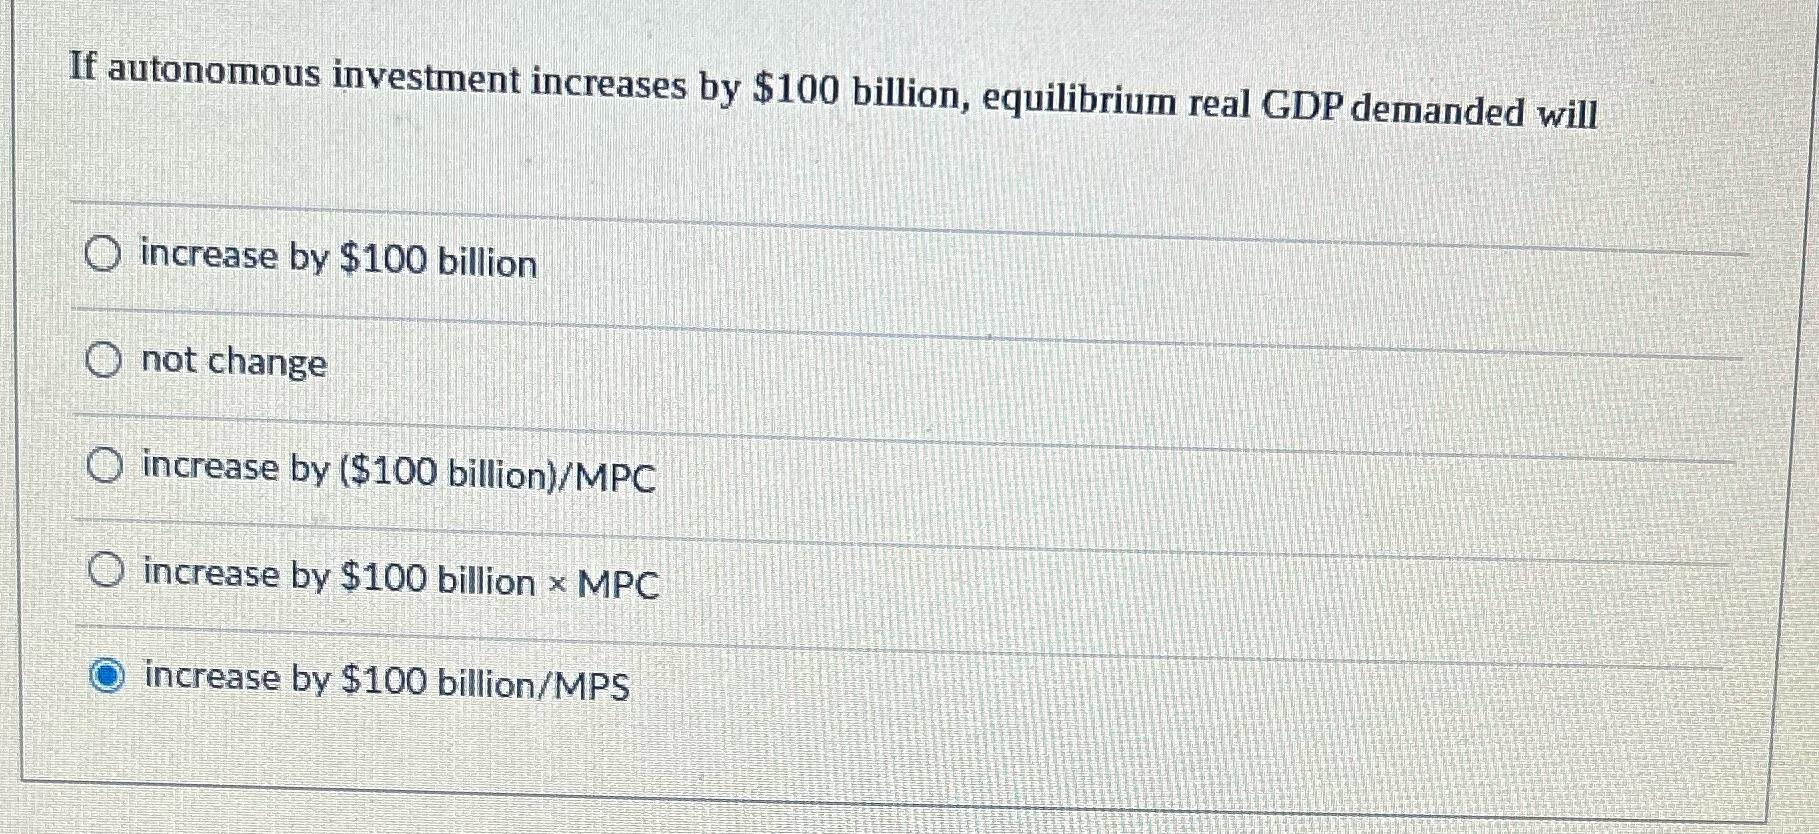 If autonomous investment increases by $100 billion, equilibrium real GDP demanded will O increase by $100